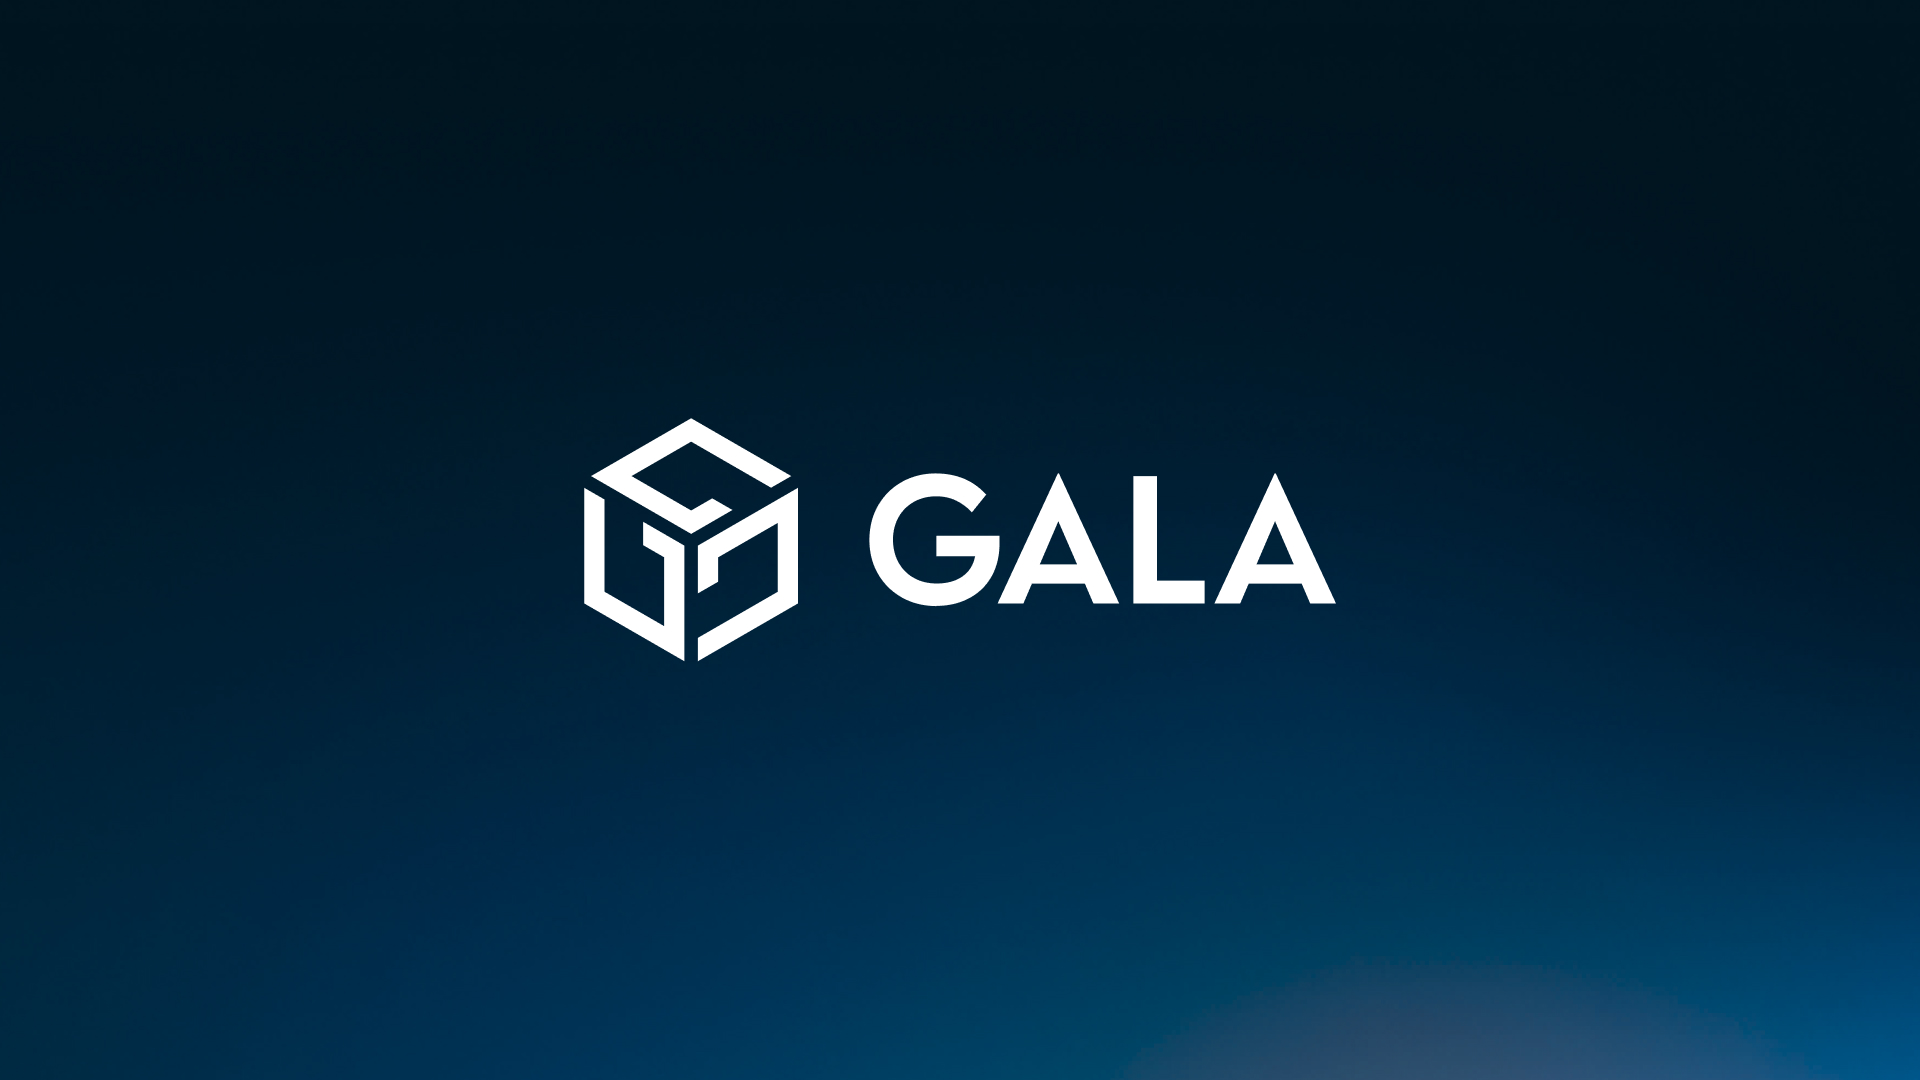 Gala is powering the decentralized future.